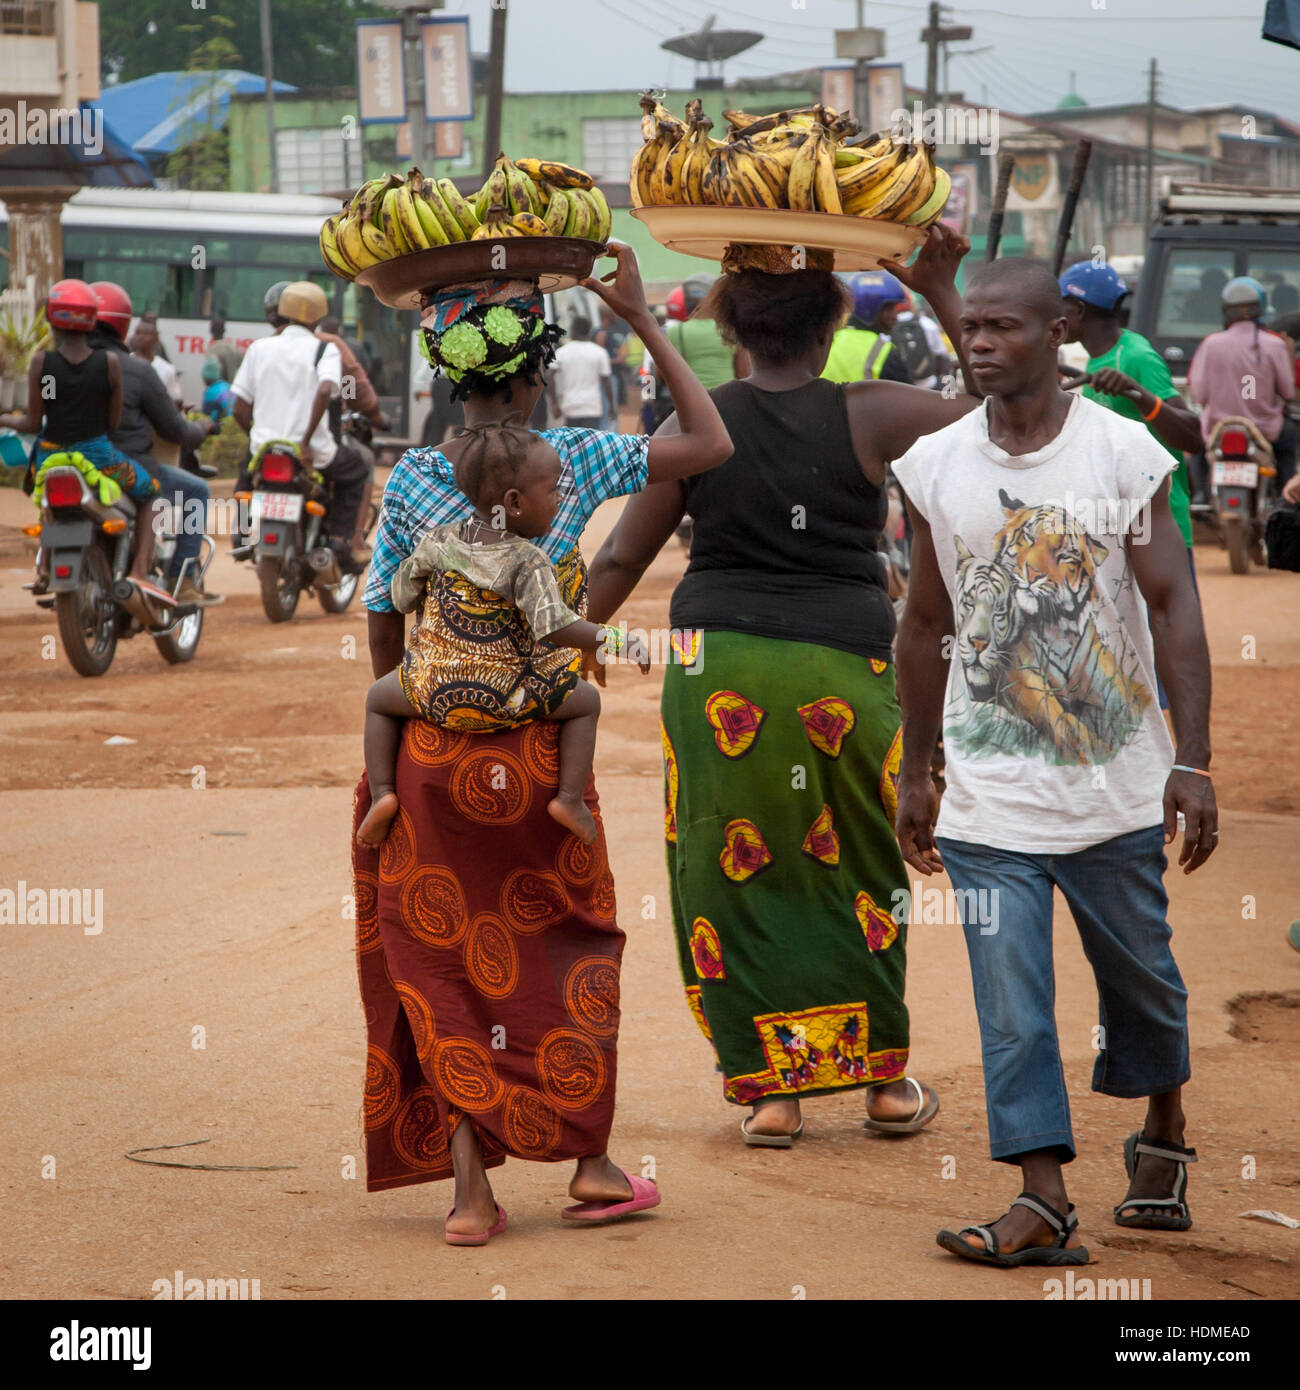 African women carrying bananas and a baby Stock Photo